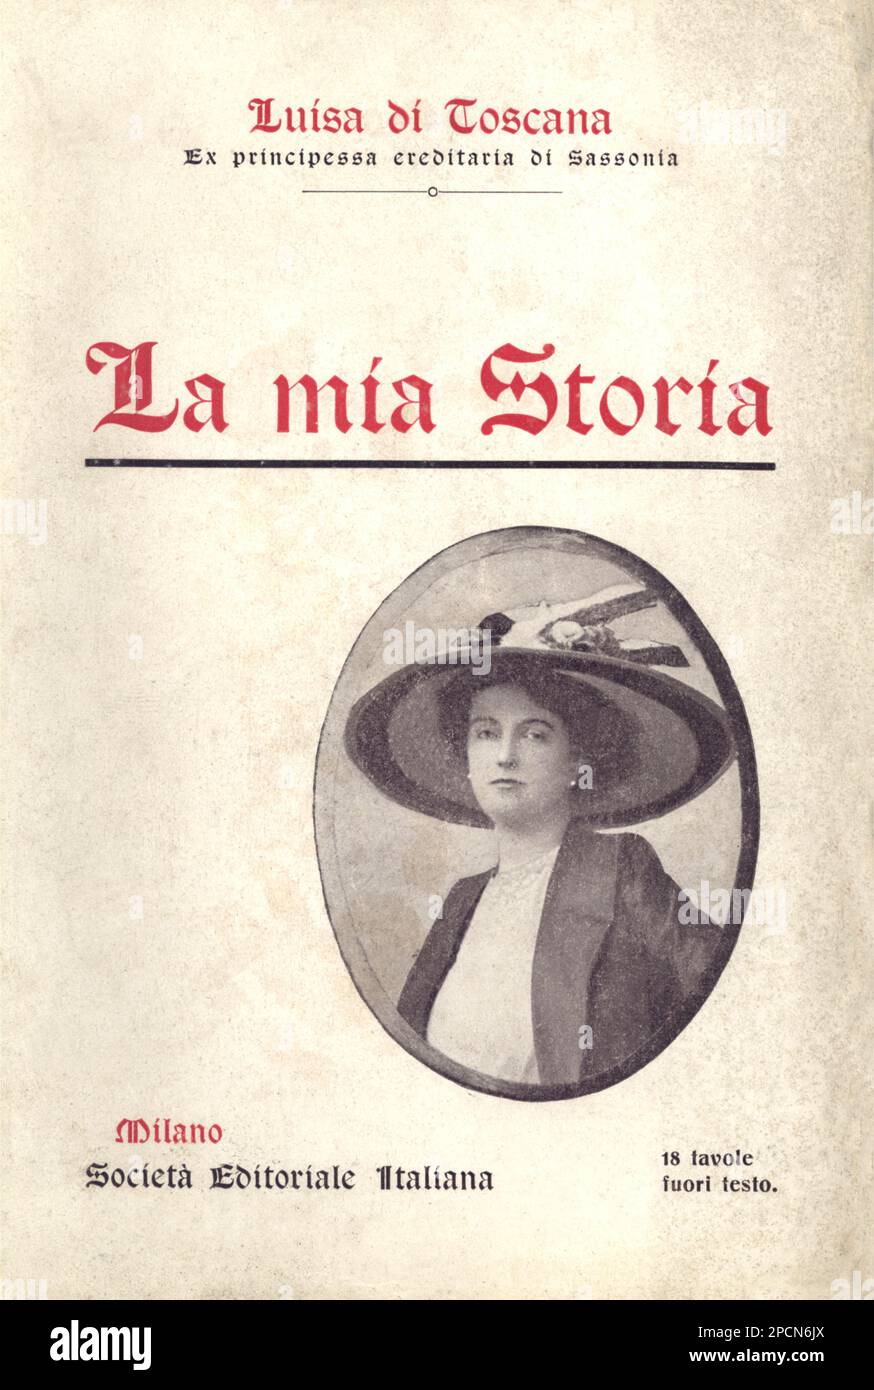 1911 , ITALY  : The scandalous austrian princess LUISE VON TOSKANA von ABSBURG von Sachsen ( 1870 - 1947 ) autobiography LA MIA STORIA , Milano , Societa' Editoriale Italiana. .  Married the first time with Friedrich August III von Sachsen ( Frederick Augustus , 1865 - 1932 ), with him have 7 sons . Princess Imperial and Archduchess of Austria, Princess of Tuscany, Hungary and Bohemia was a daughter of Ferdinand IV of Tuscany and his second wife Alicia of Parma.  She was divorced 11 February 1903. Her father created her Countess of Montignoso . On 25 September 1907 Luise married the Italian mu Stock Photo